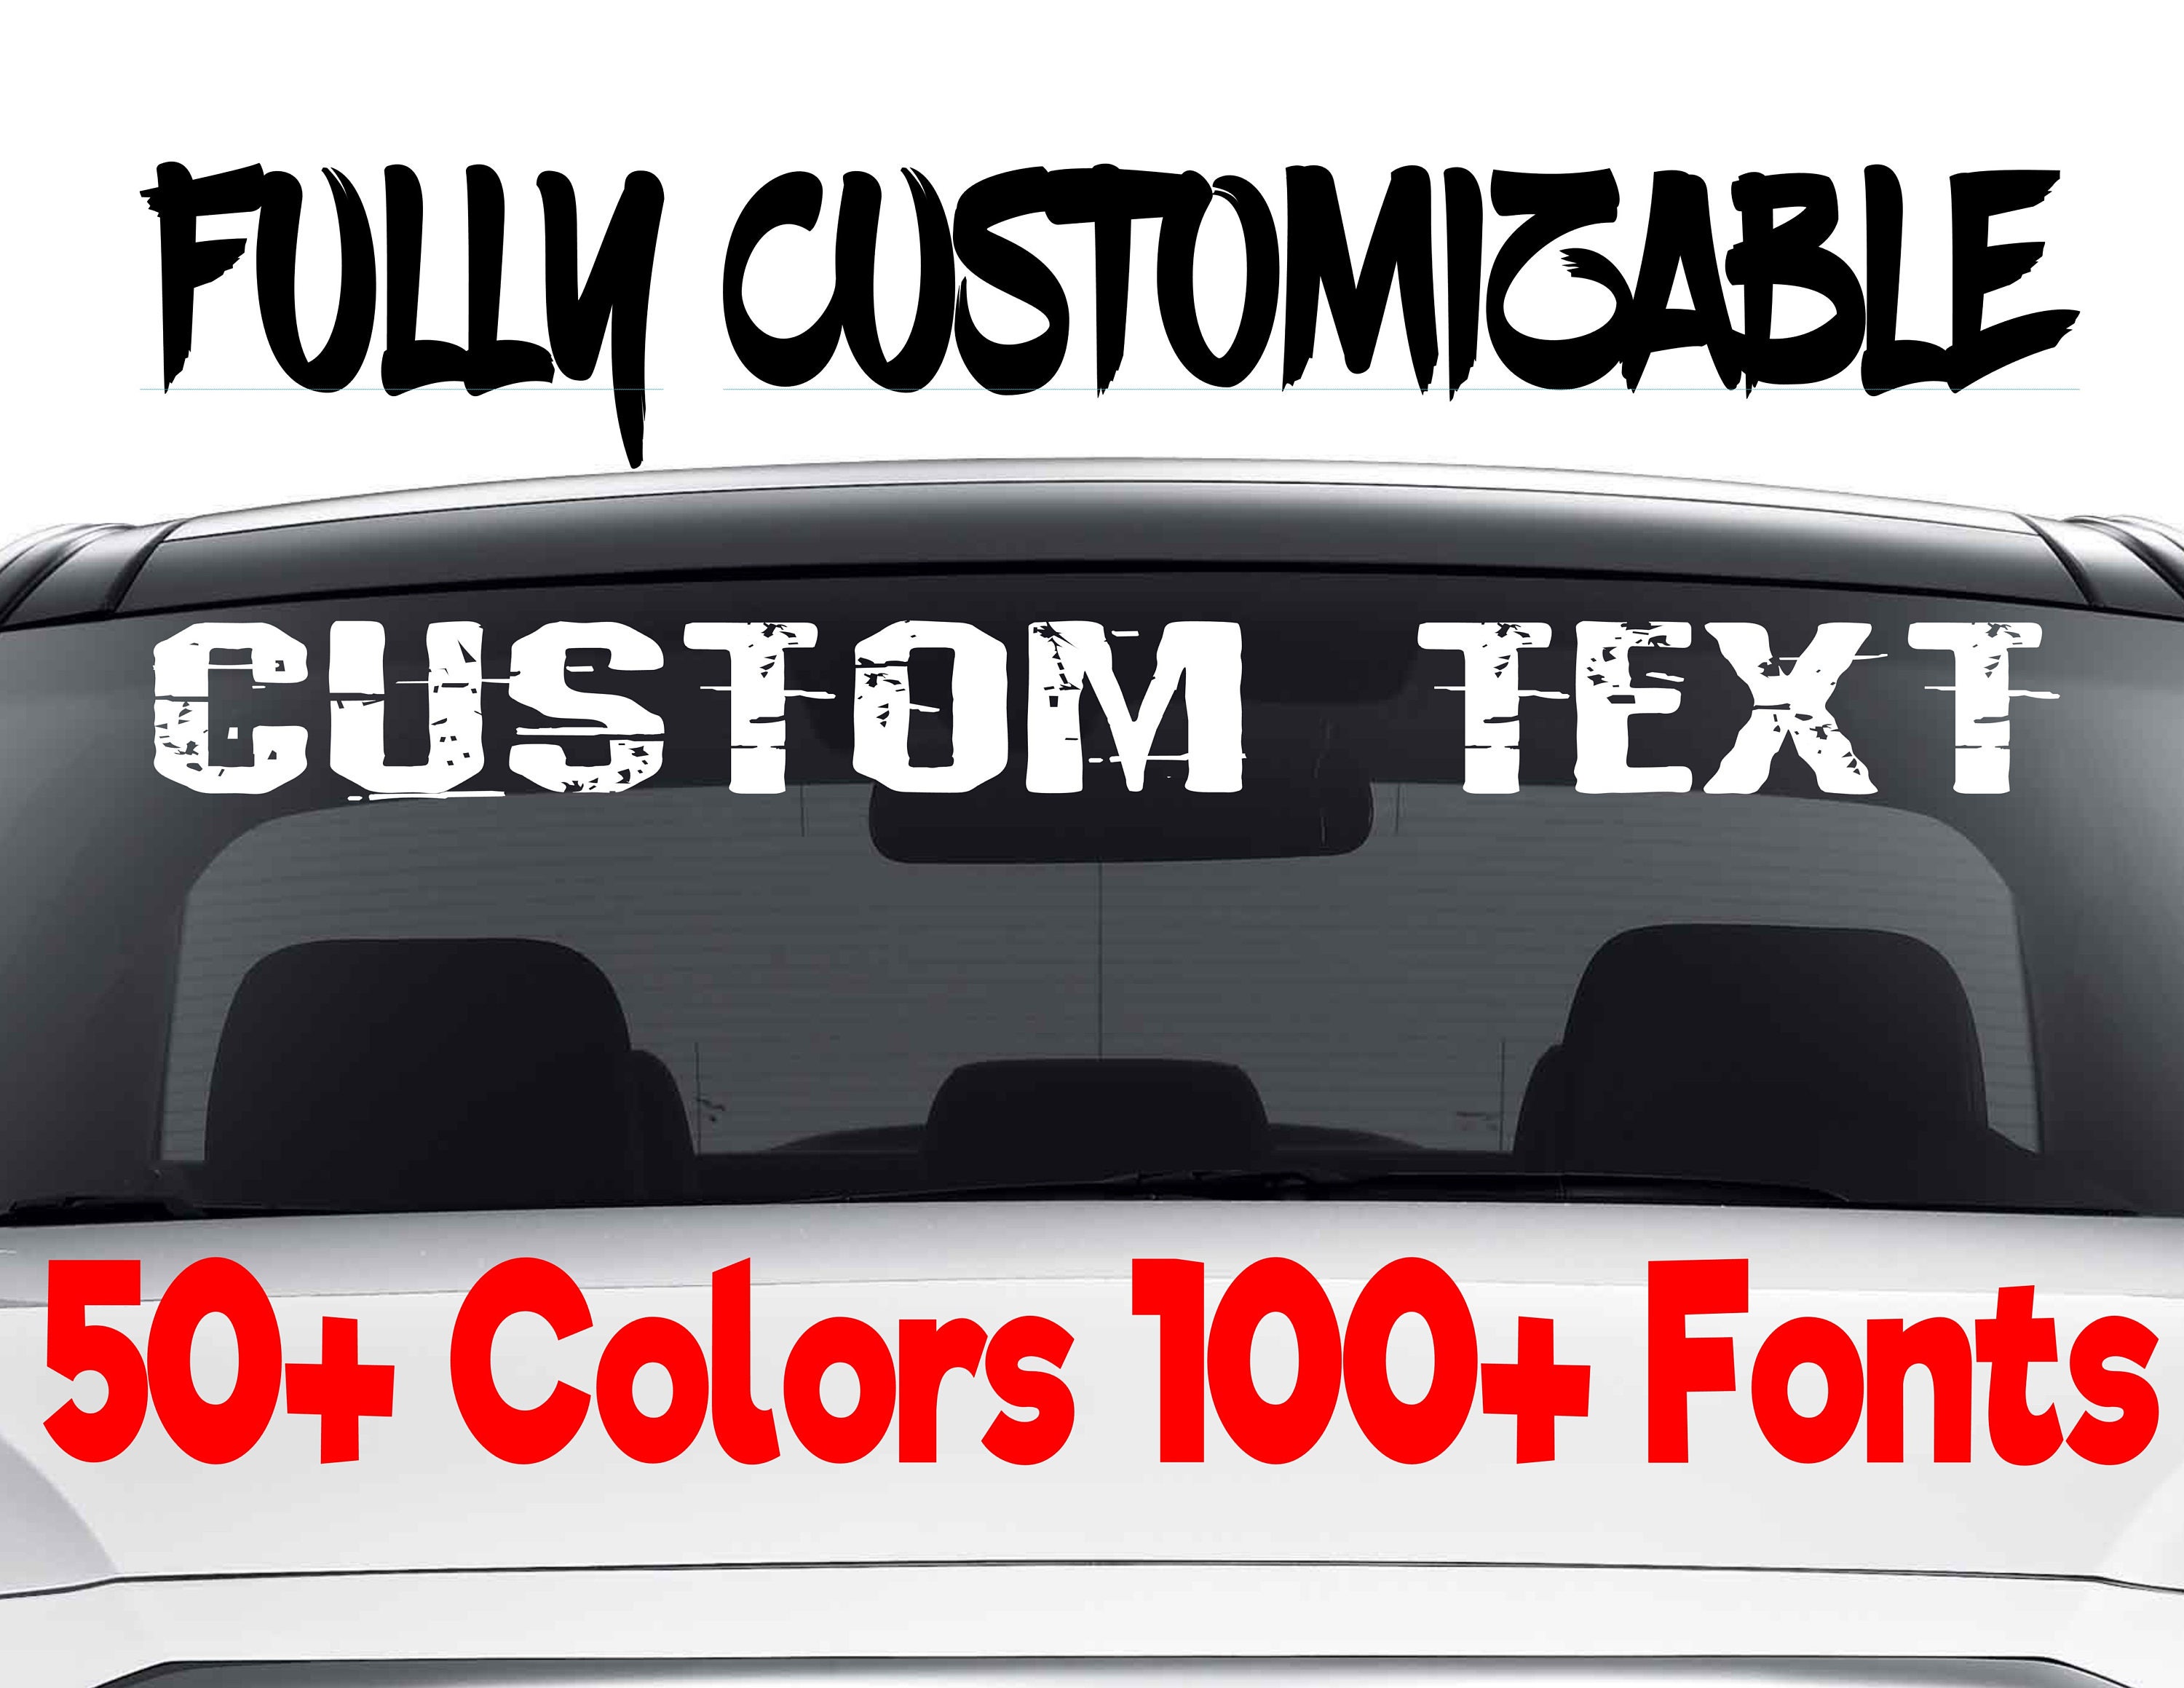 Sign Banner Door Custom Made Decal Sticker Auto Truck Windshield Window Letters & Numbers 1060 Graphics 4 high Vinyl Lettering Boat for Car 